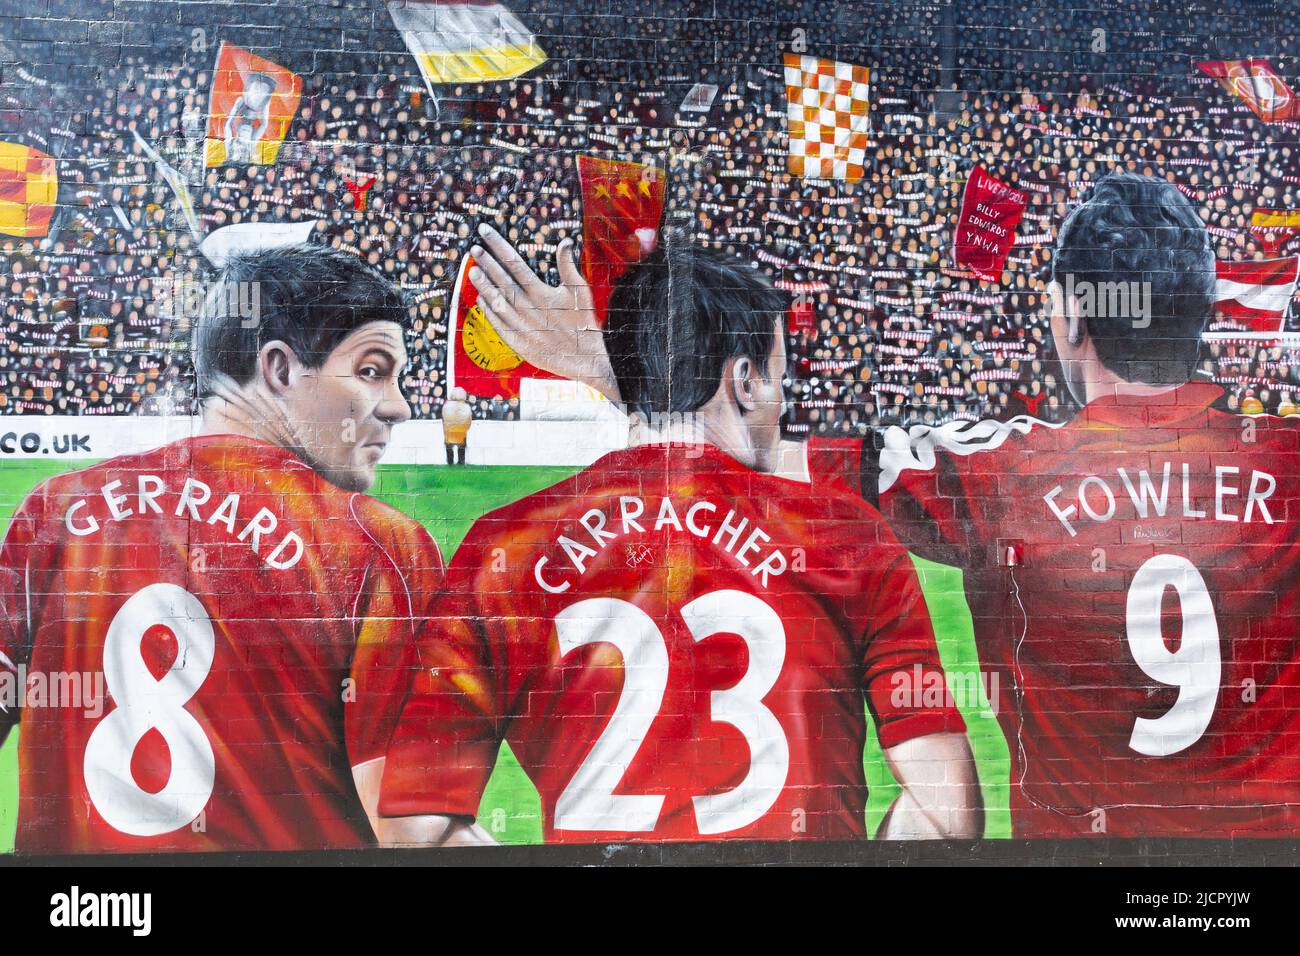 Liverpool FC mural featuring Steven Gerrard, Jamie Carragher and Robbie Fowler, Anfield, Liverpool, England, UK Stock Photo